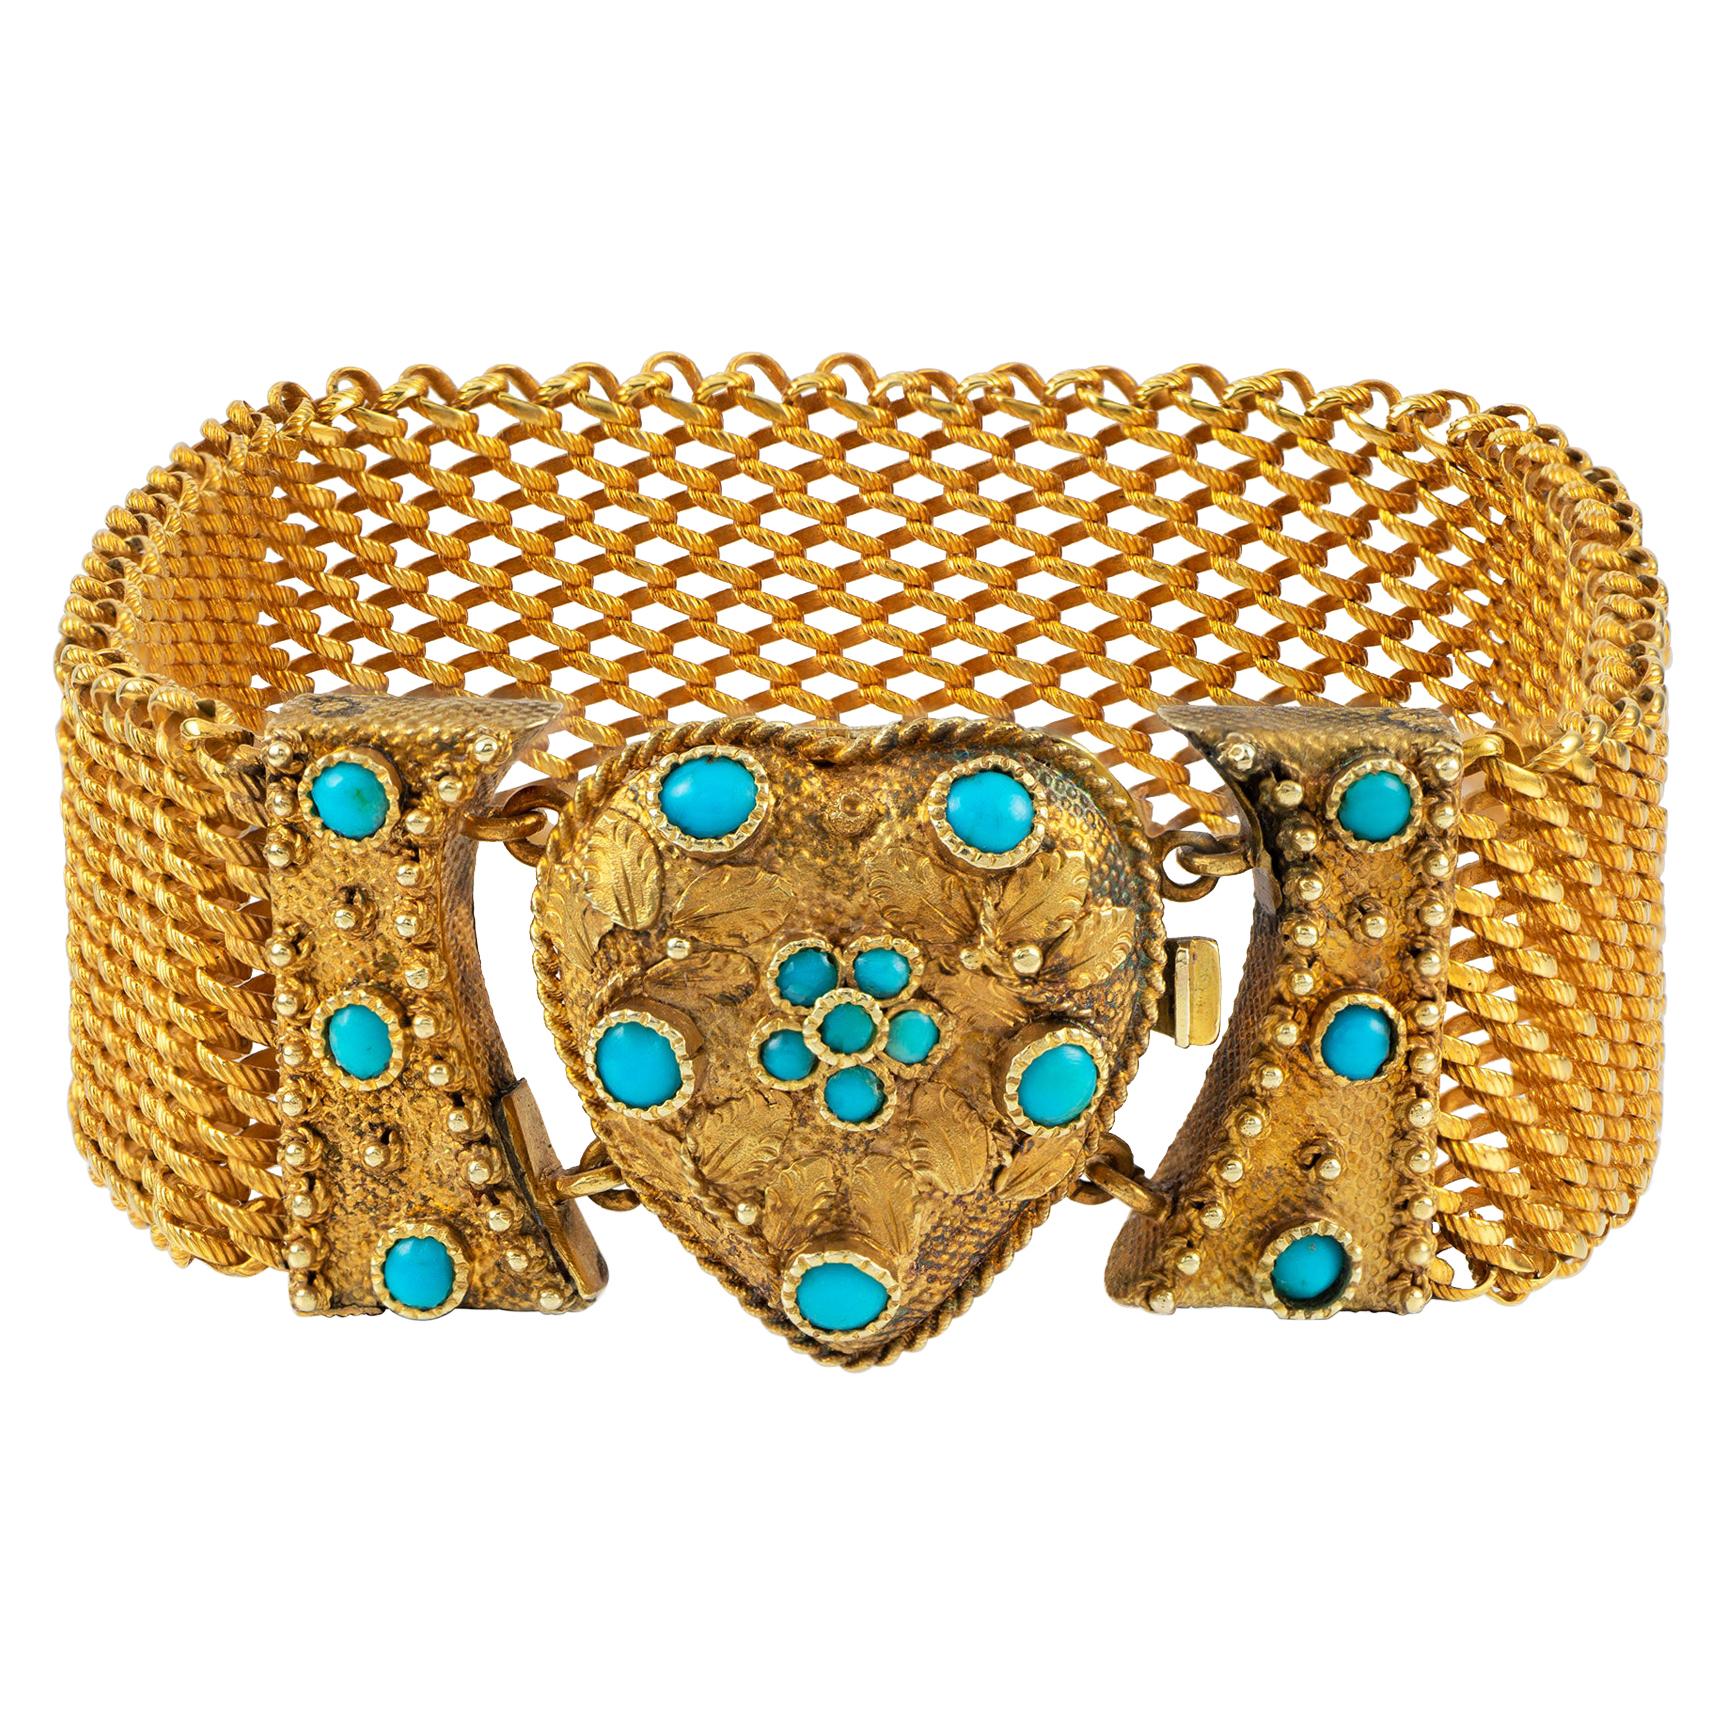 Georgian Gold and Turquoise Bracelet